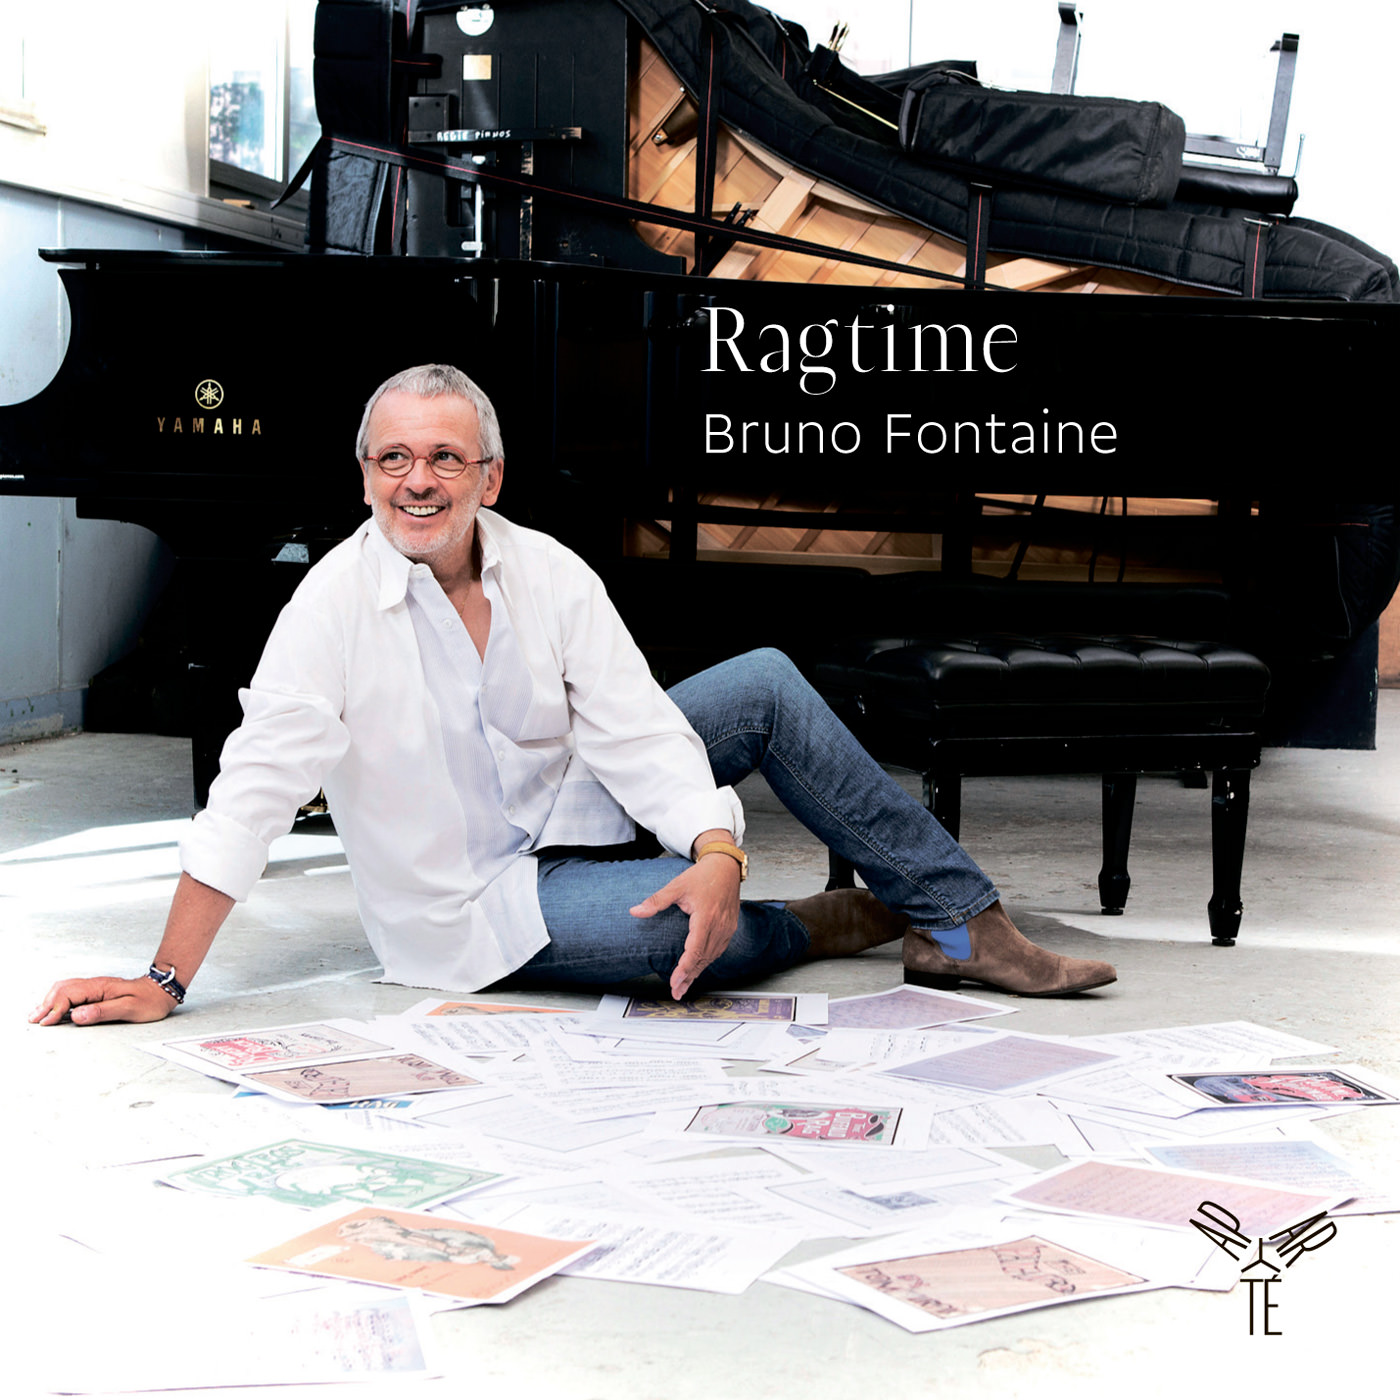 Bruno Fontaine – Ragtime {Deluxe 5.1 Edition} (2013/2014) [Qobuz FLAC 5.1 Surround 24bit/96kHz]